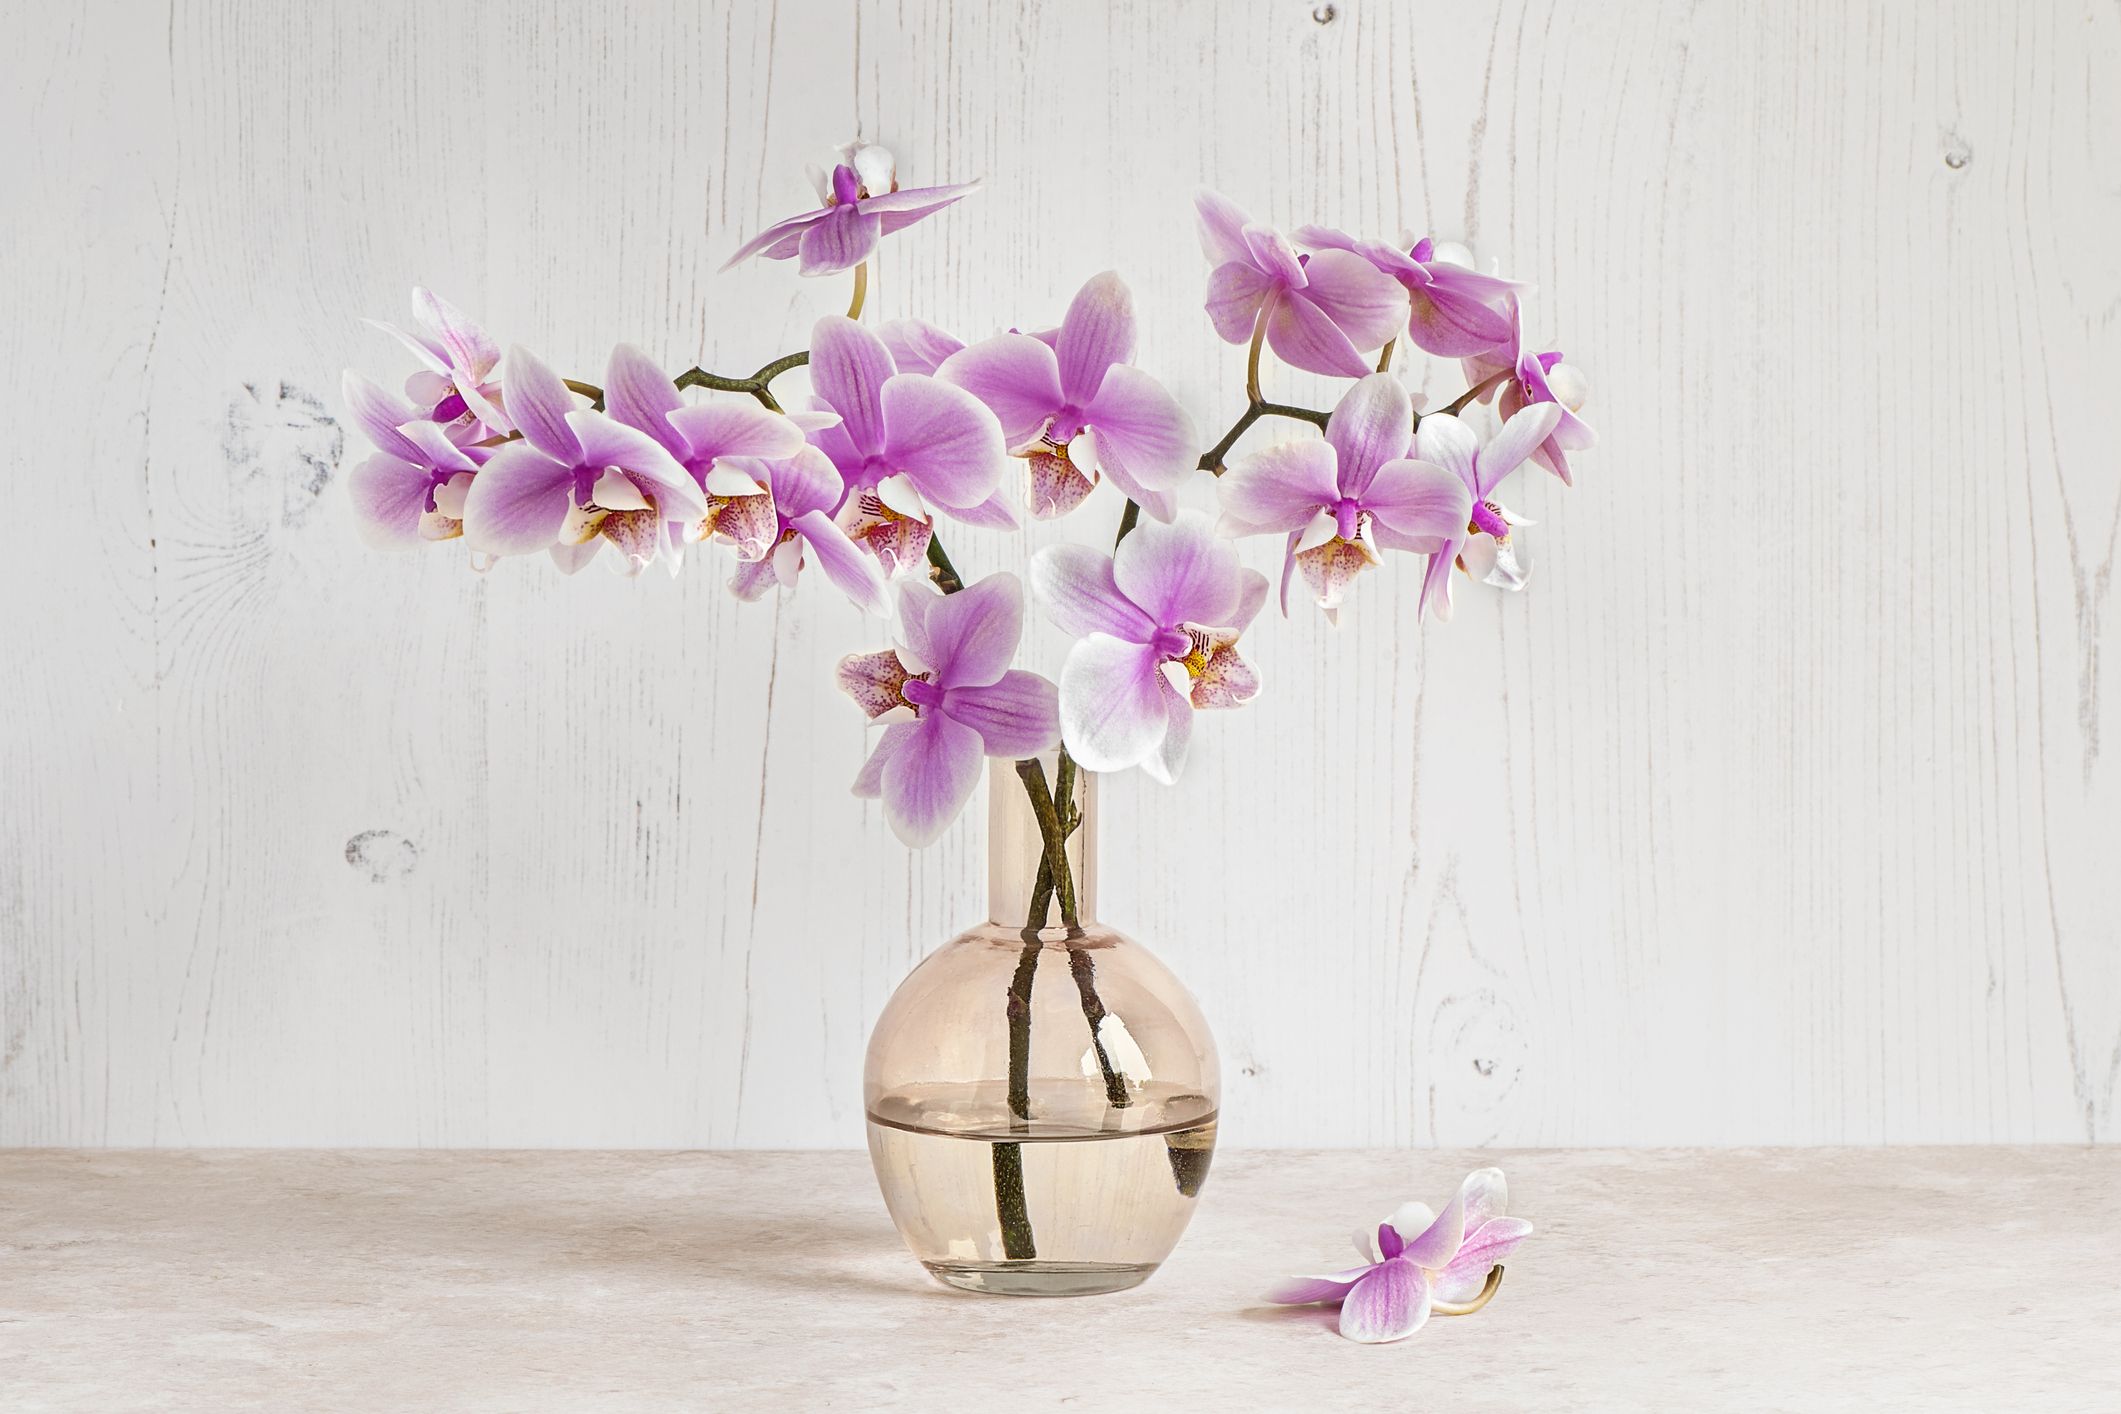 How to Make Fake Orchids - Blue, Orange and Even Green Ones